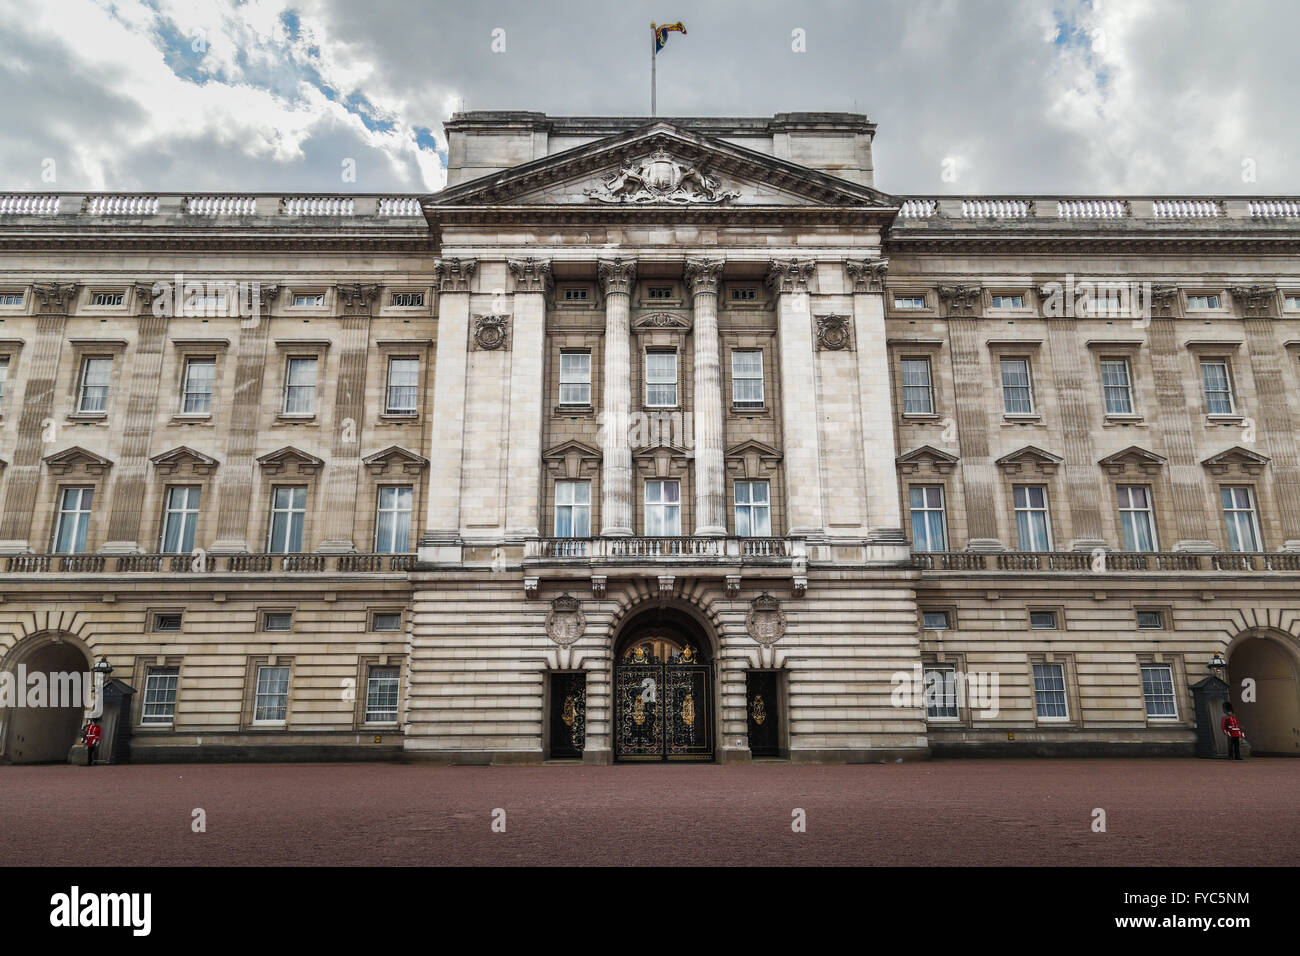 The front facade of Buckingham Palace on a gloomy London day. Stock Photo